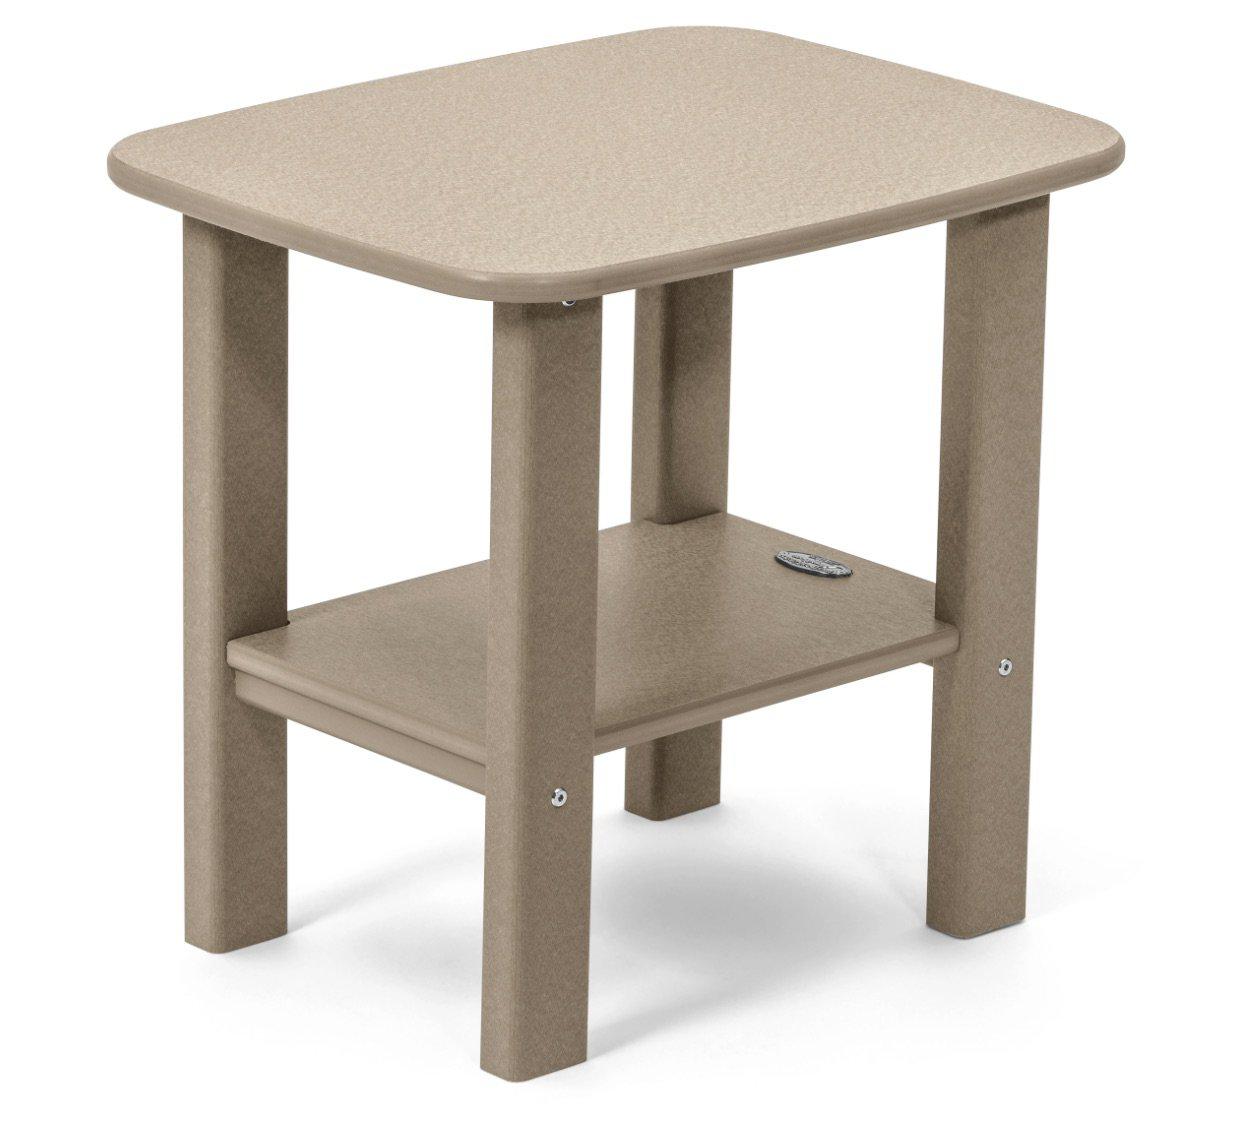 Perfect Choice Furniture Recycled Plastic Side Table - LEAD TIME TO SHIP 4 WEEKS OR LESS